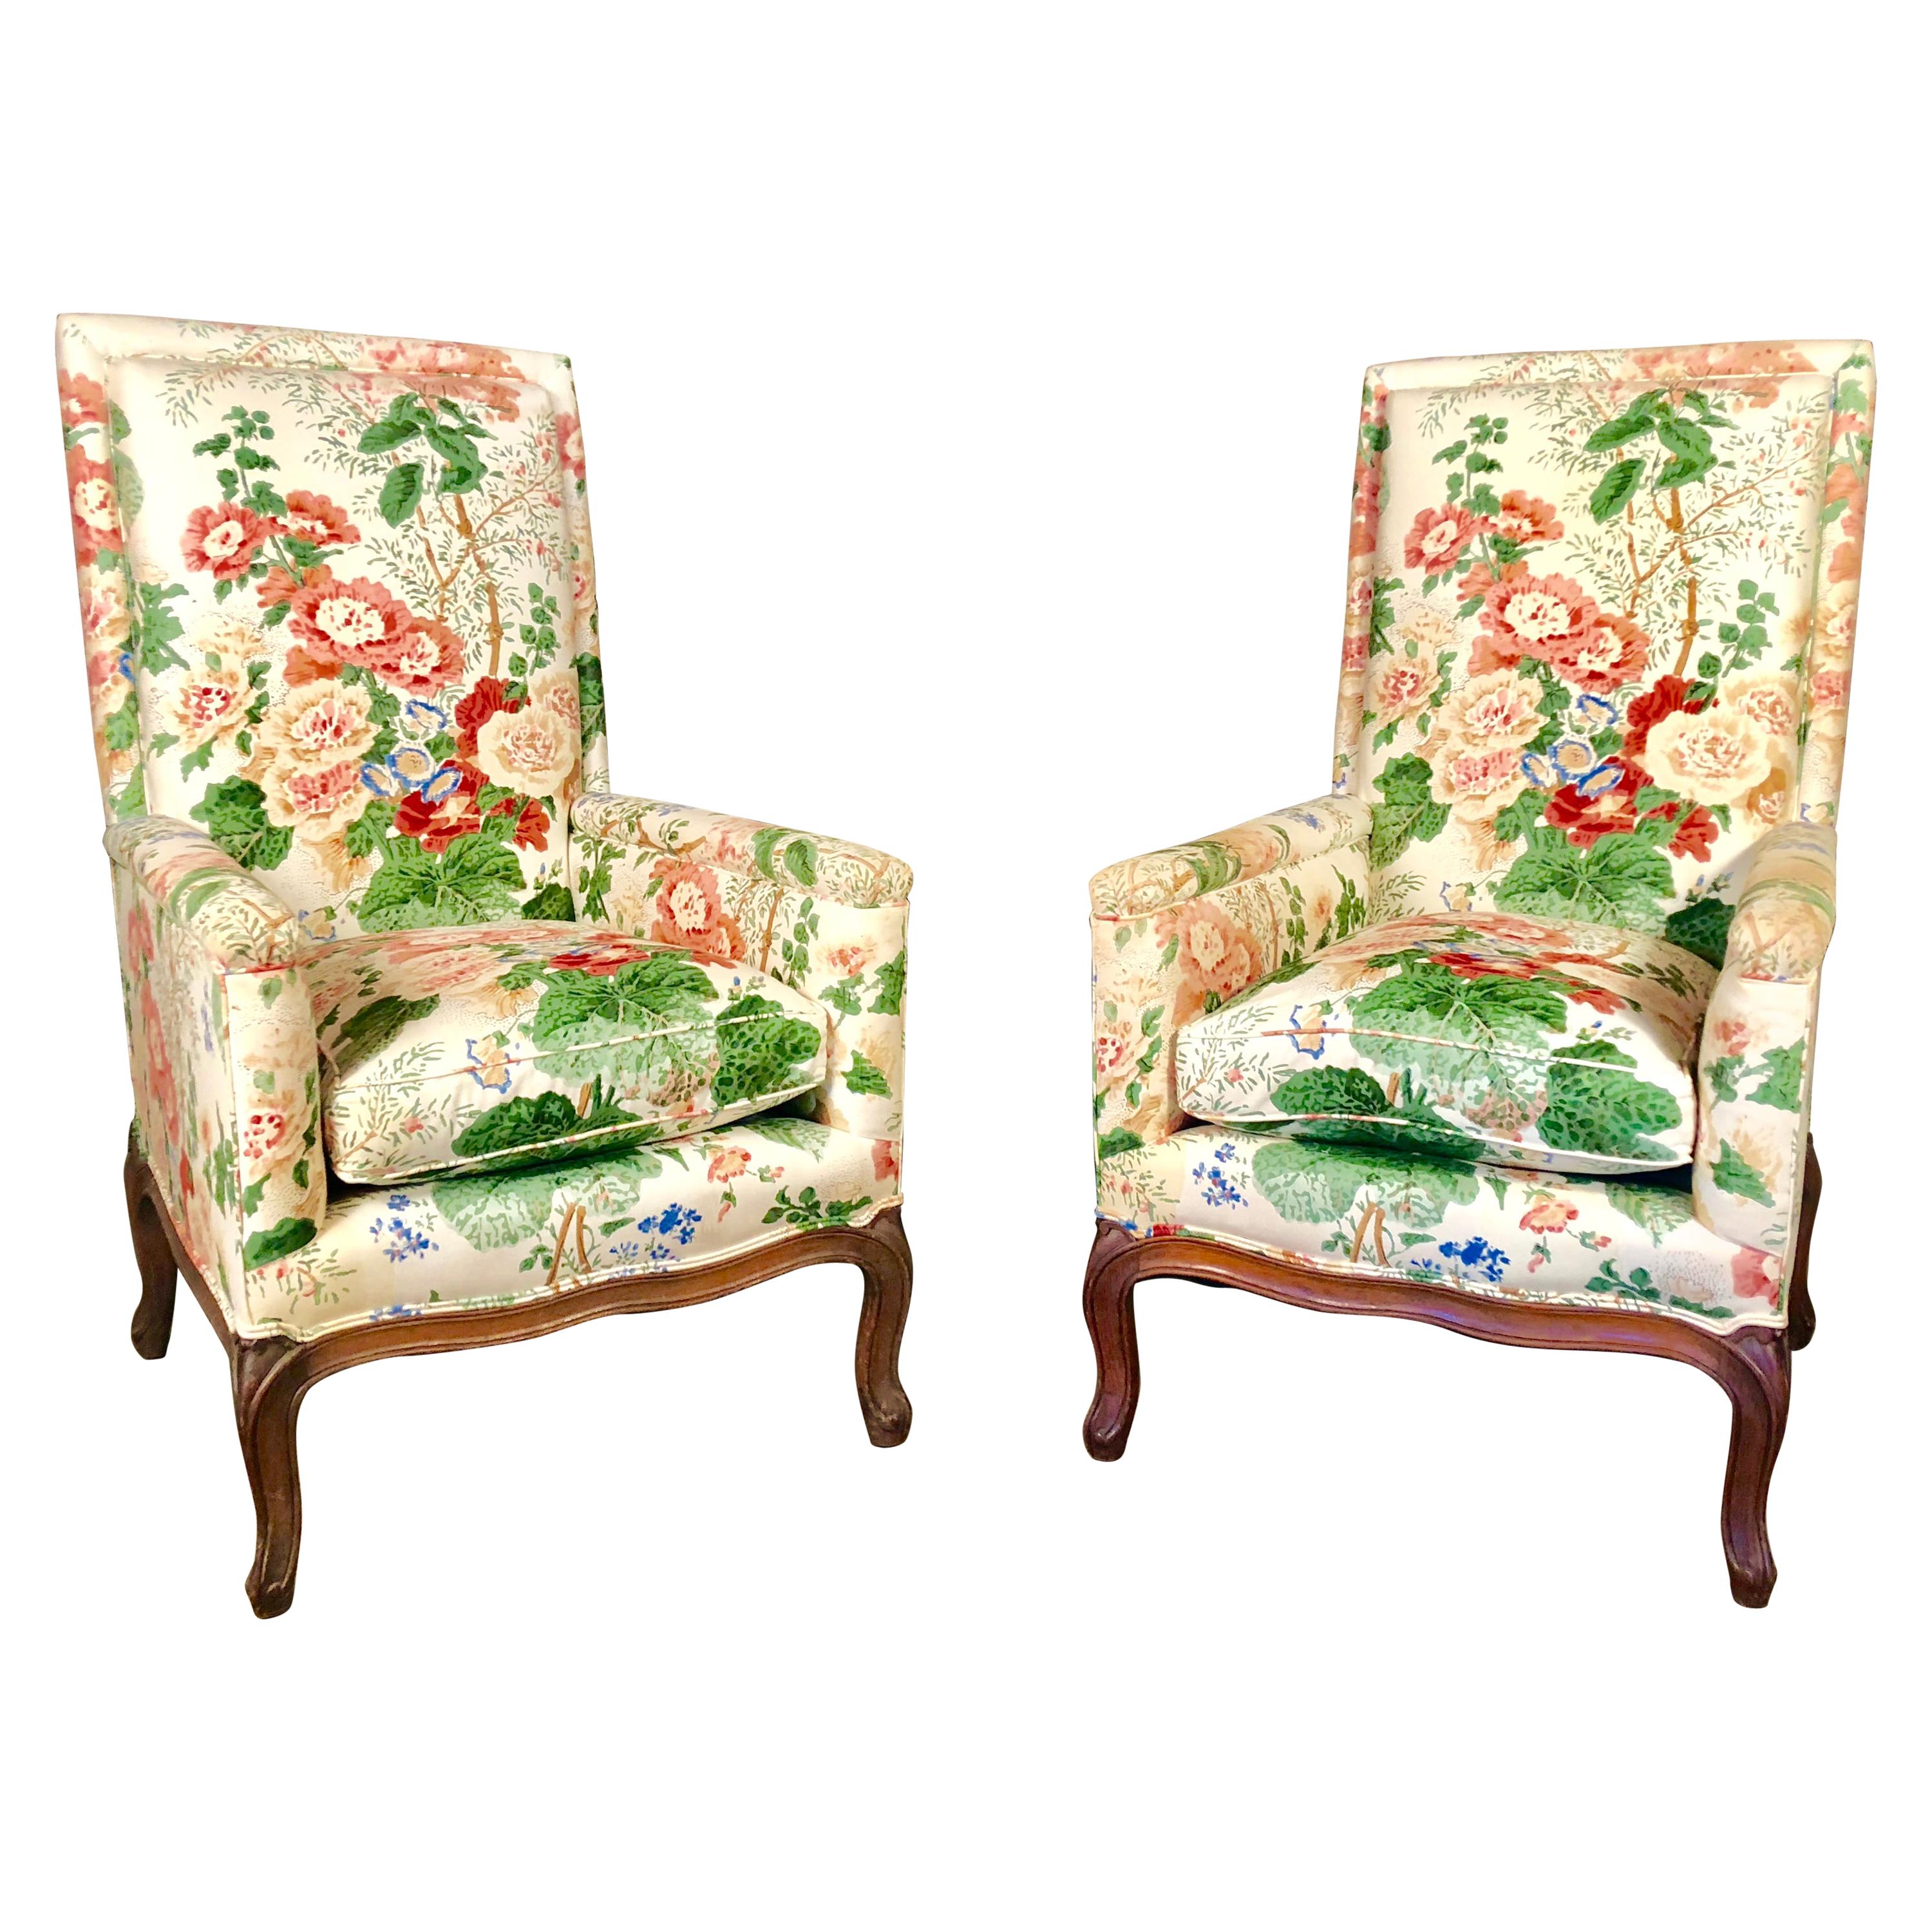 Pair of Louis XV Upholstered Armchairs, 18th Century